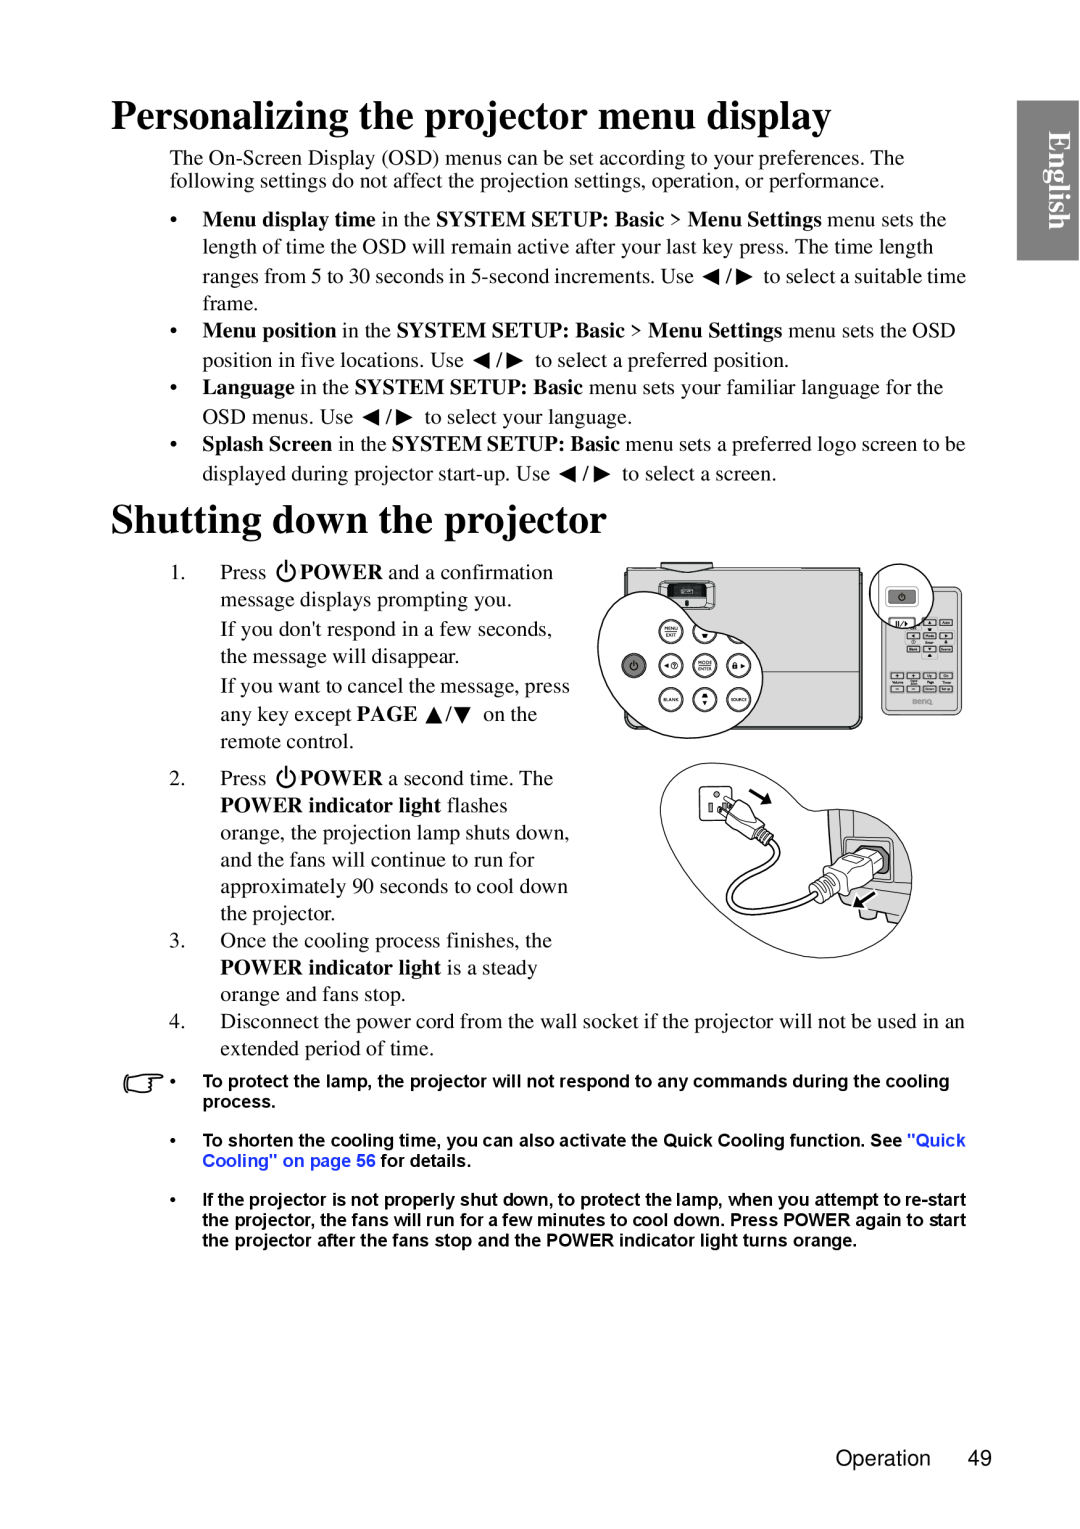 BenQ MP670 user manual Personalizing the projector menu display, Shutting down the projector, English 